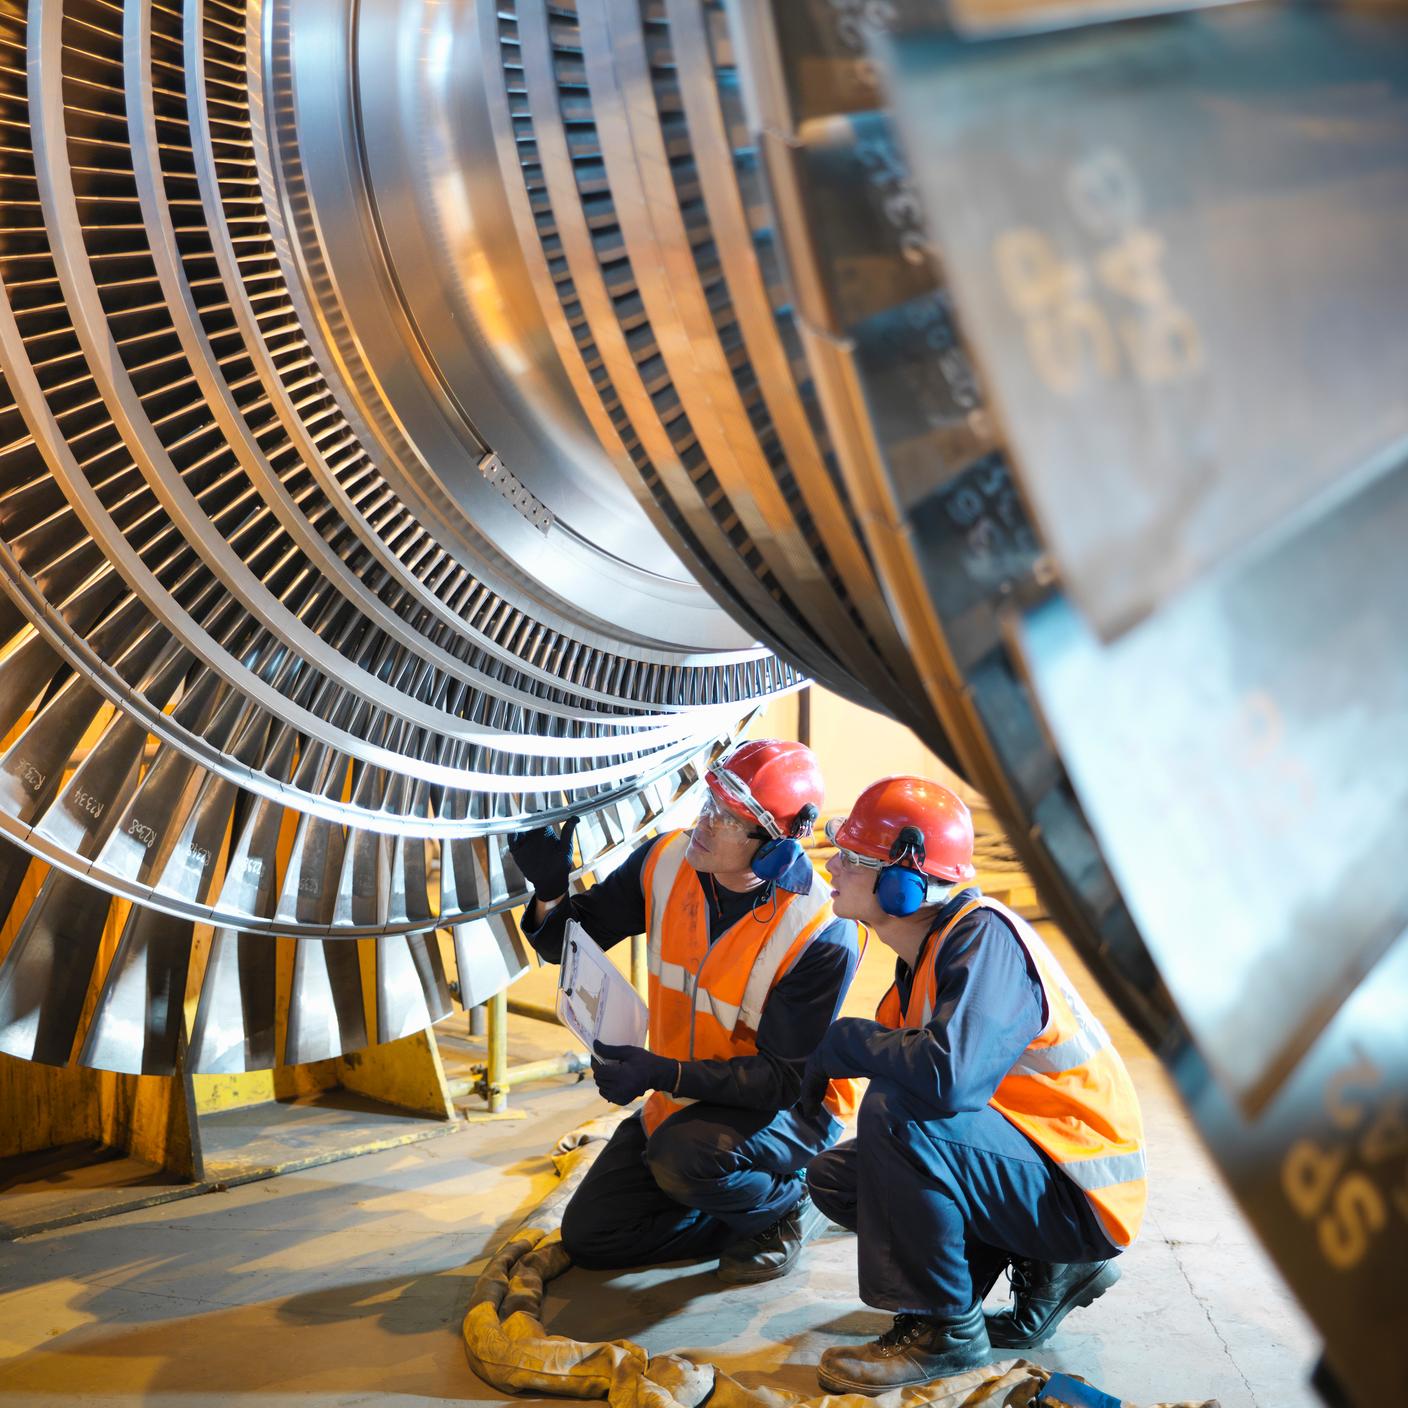 Health and safety - Workers inspect turbine in power station